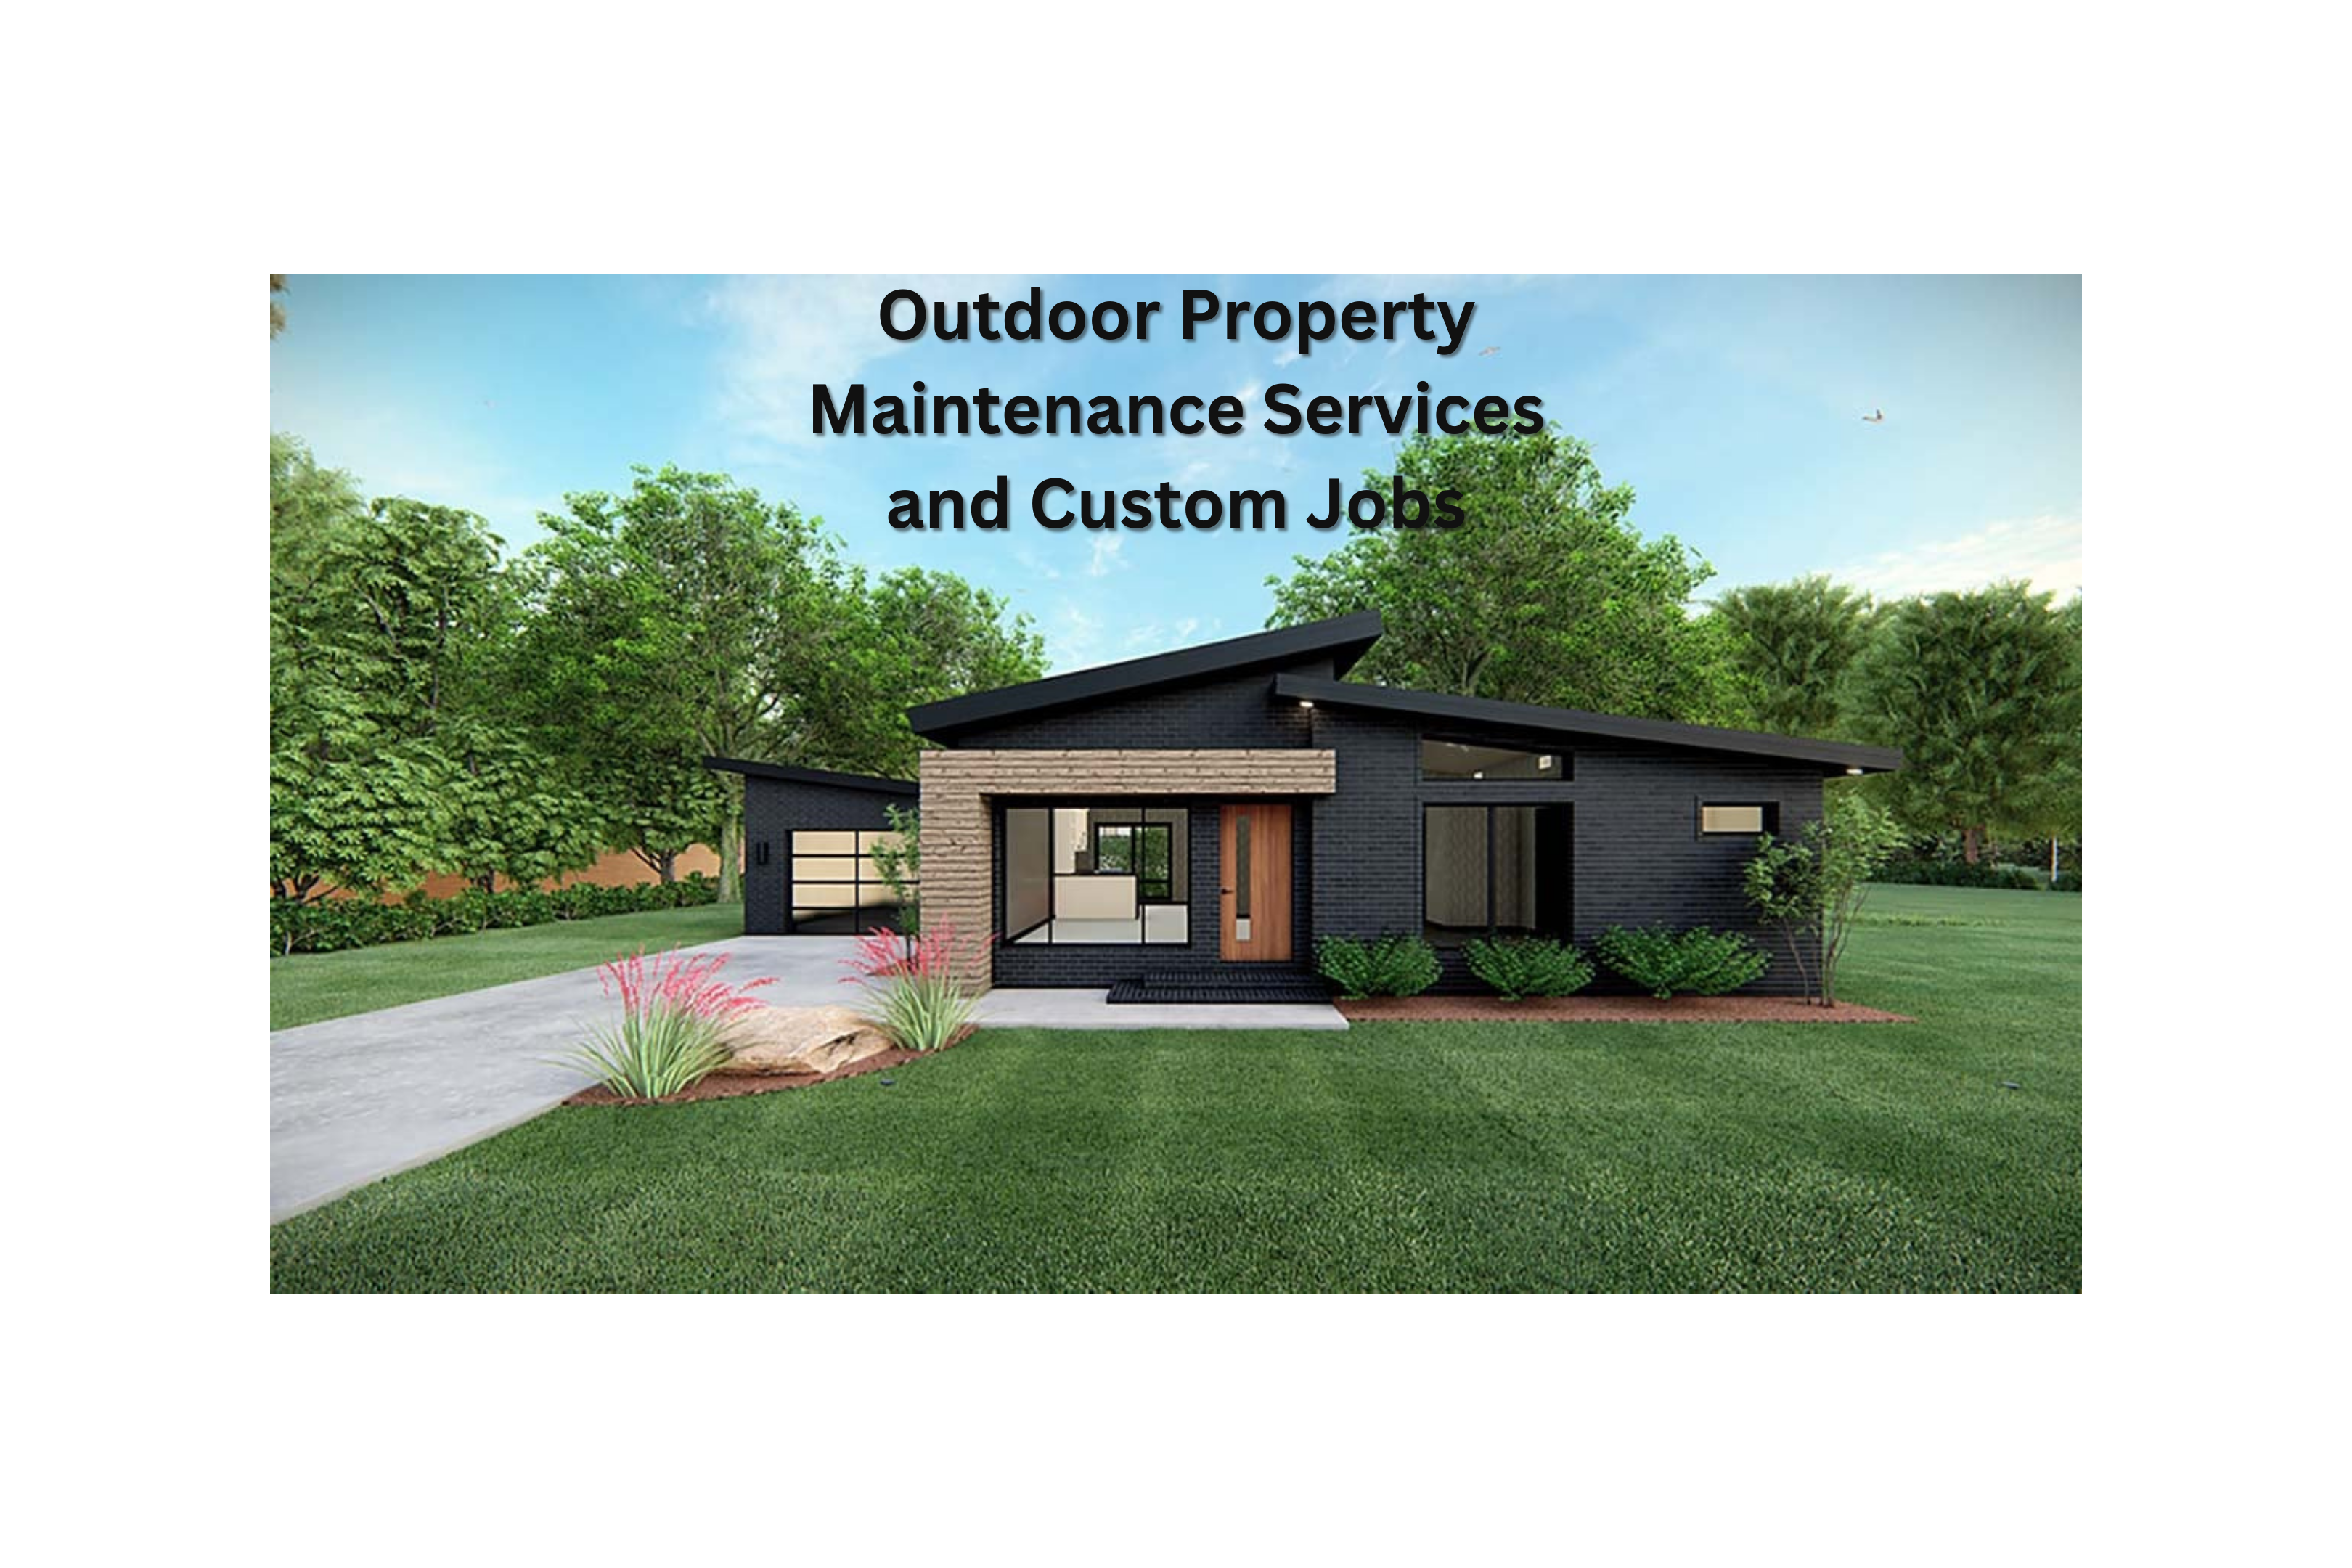 Outdoor Property Maintenance Services and Custom Jobs